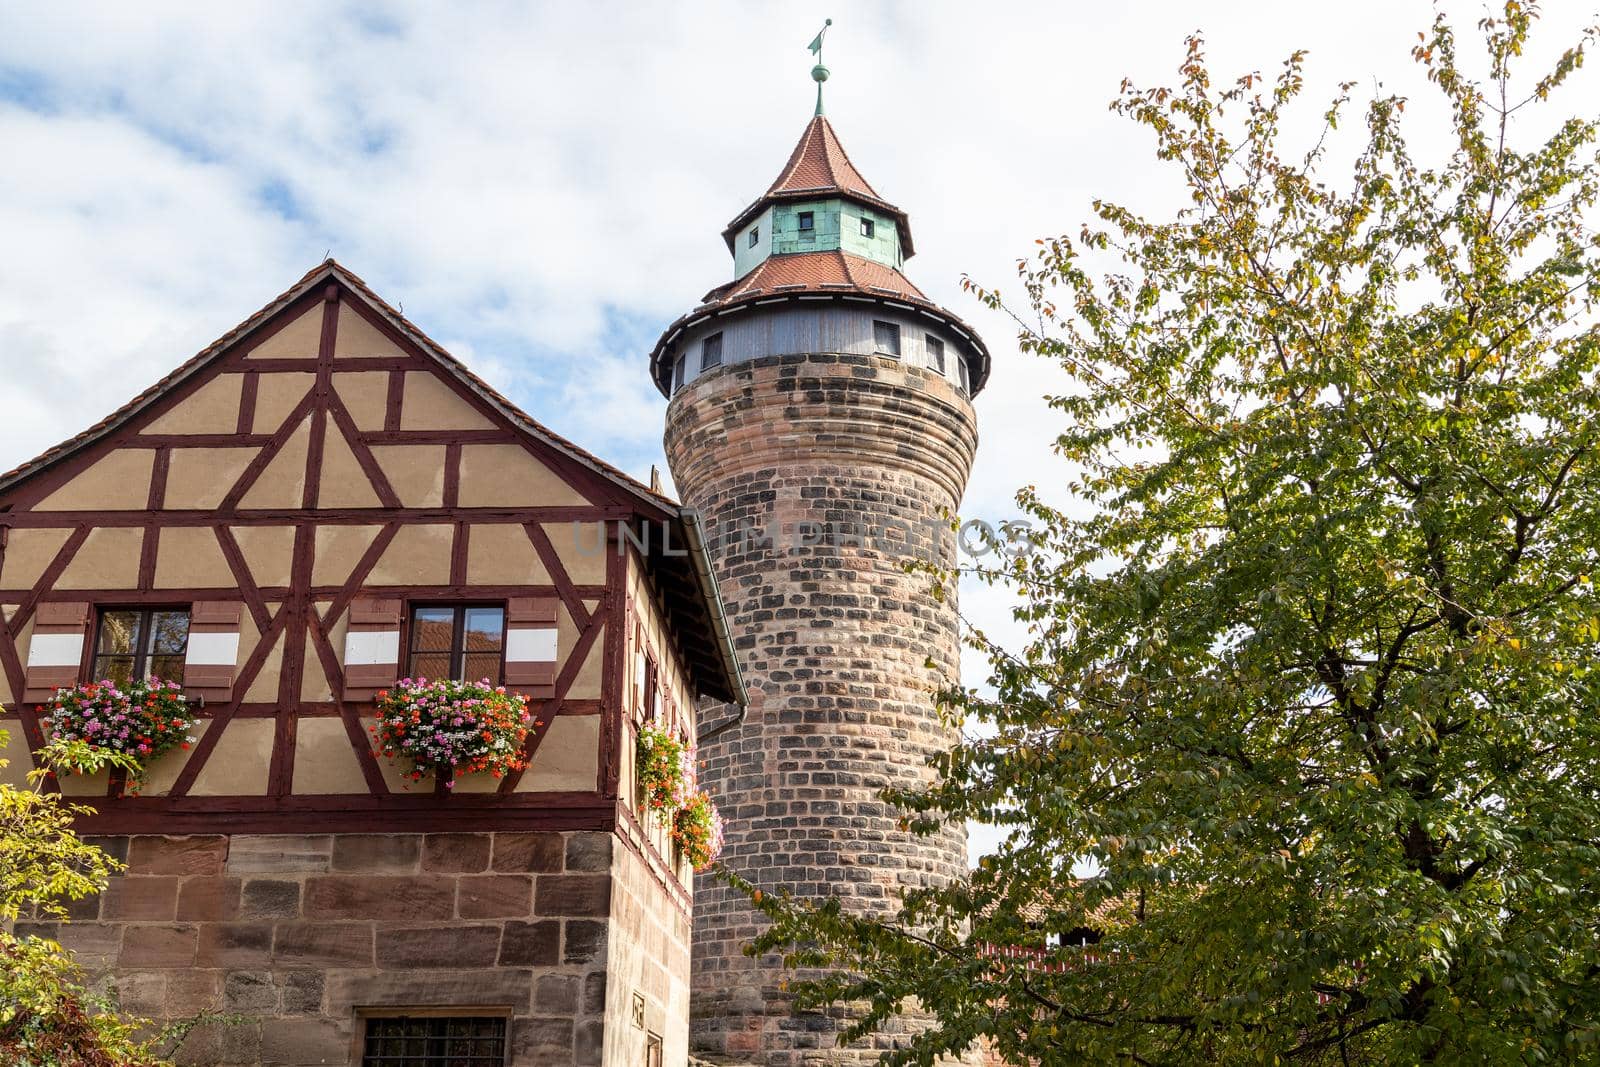 Historic tower and timbered house (frame house) of the Nuremberg castle, Bavaria, Germany by reinerc